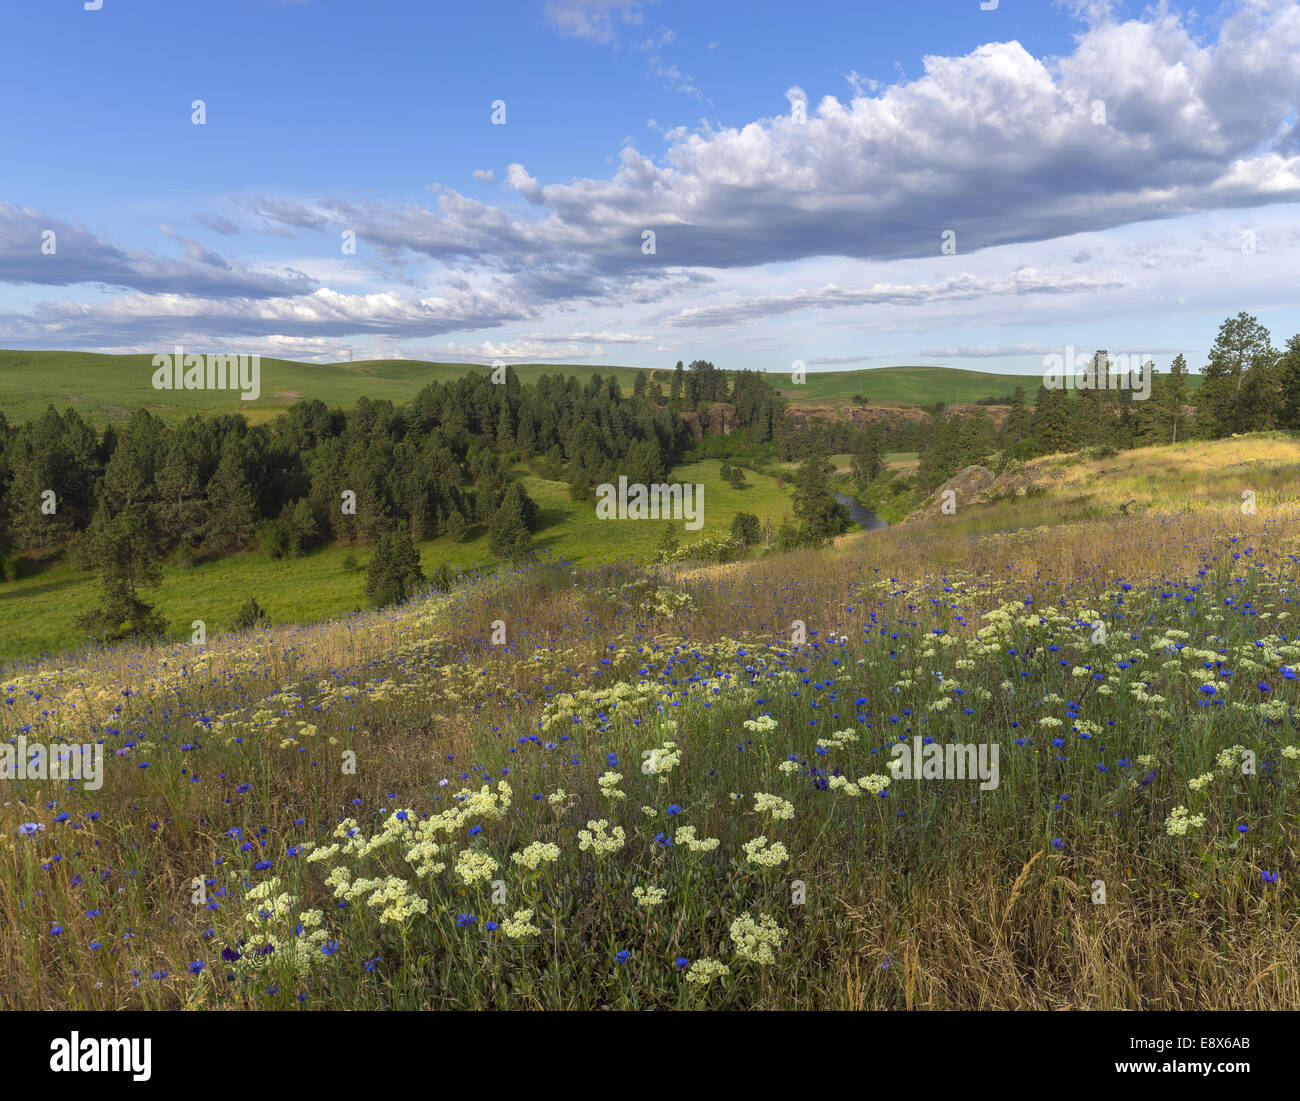 The Palouse, Whitman County, WA: Buckwheat (Eriogonum heracleoides) and bachelor's buttons (Centaurea cyanus) in an open meadow Stock Photo